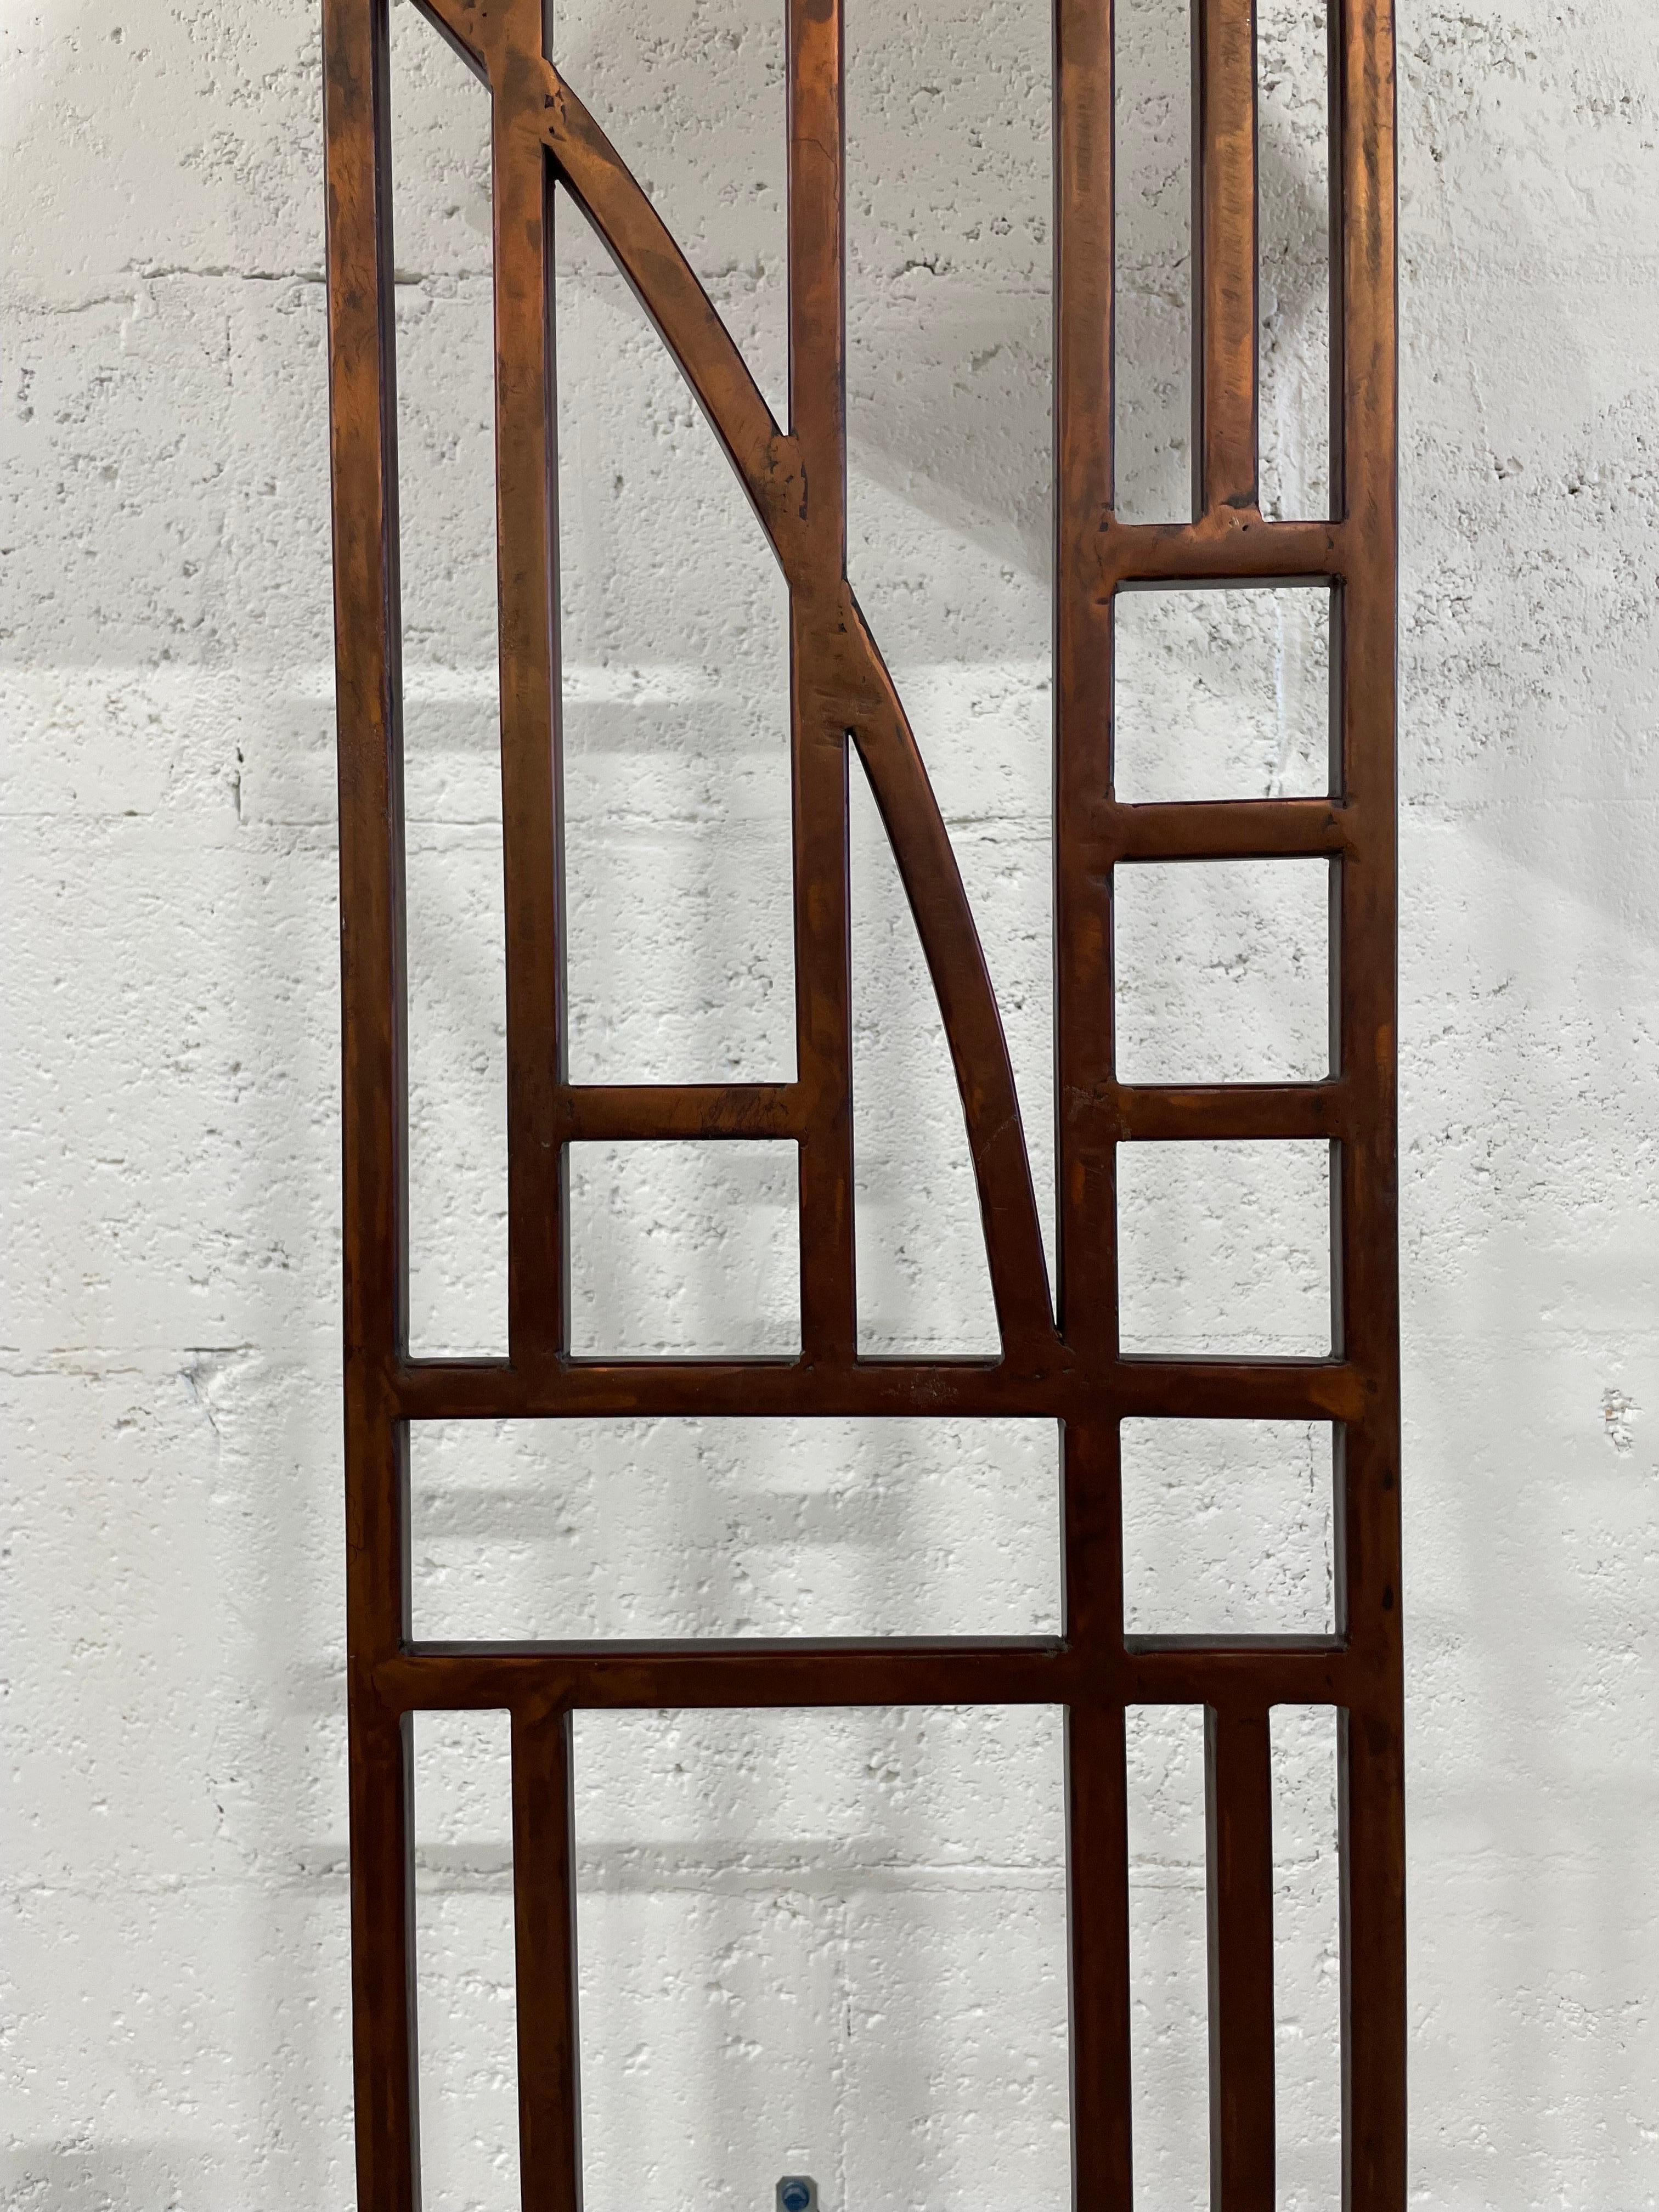 Robert Sonneman for George Kovacs Floor Lamps. Burnished copper.
Lamp 56h 9.5w
Torchiere 69.5h 9w